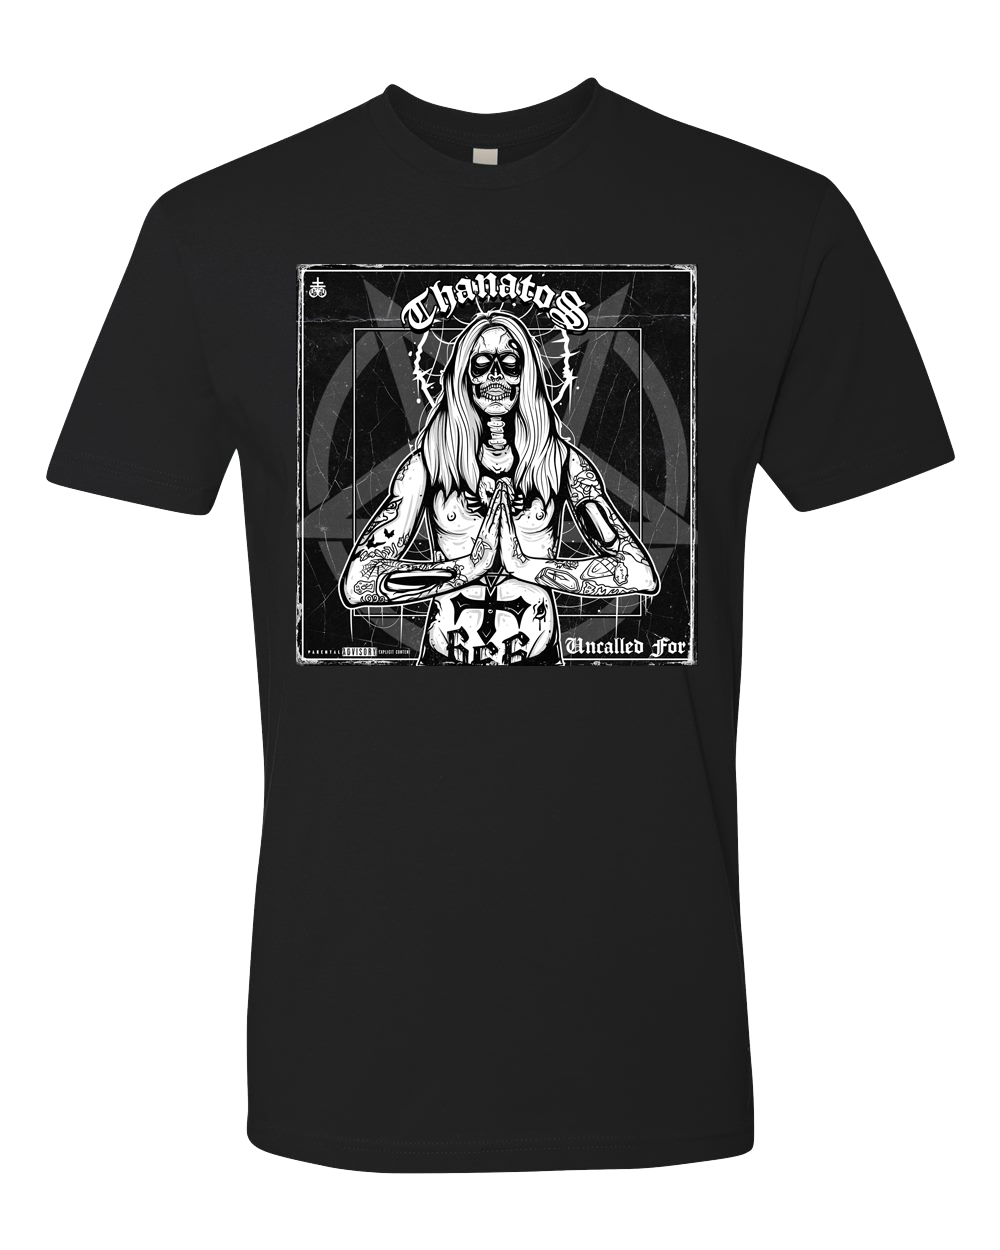 Thanatos - Uncalled For - Black T-Shirt